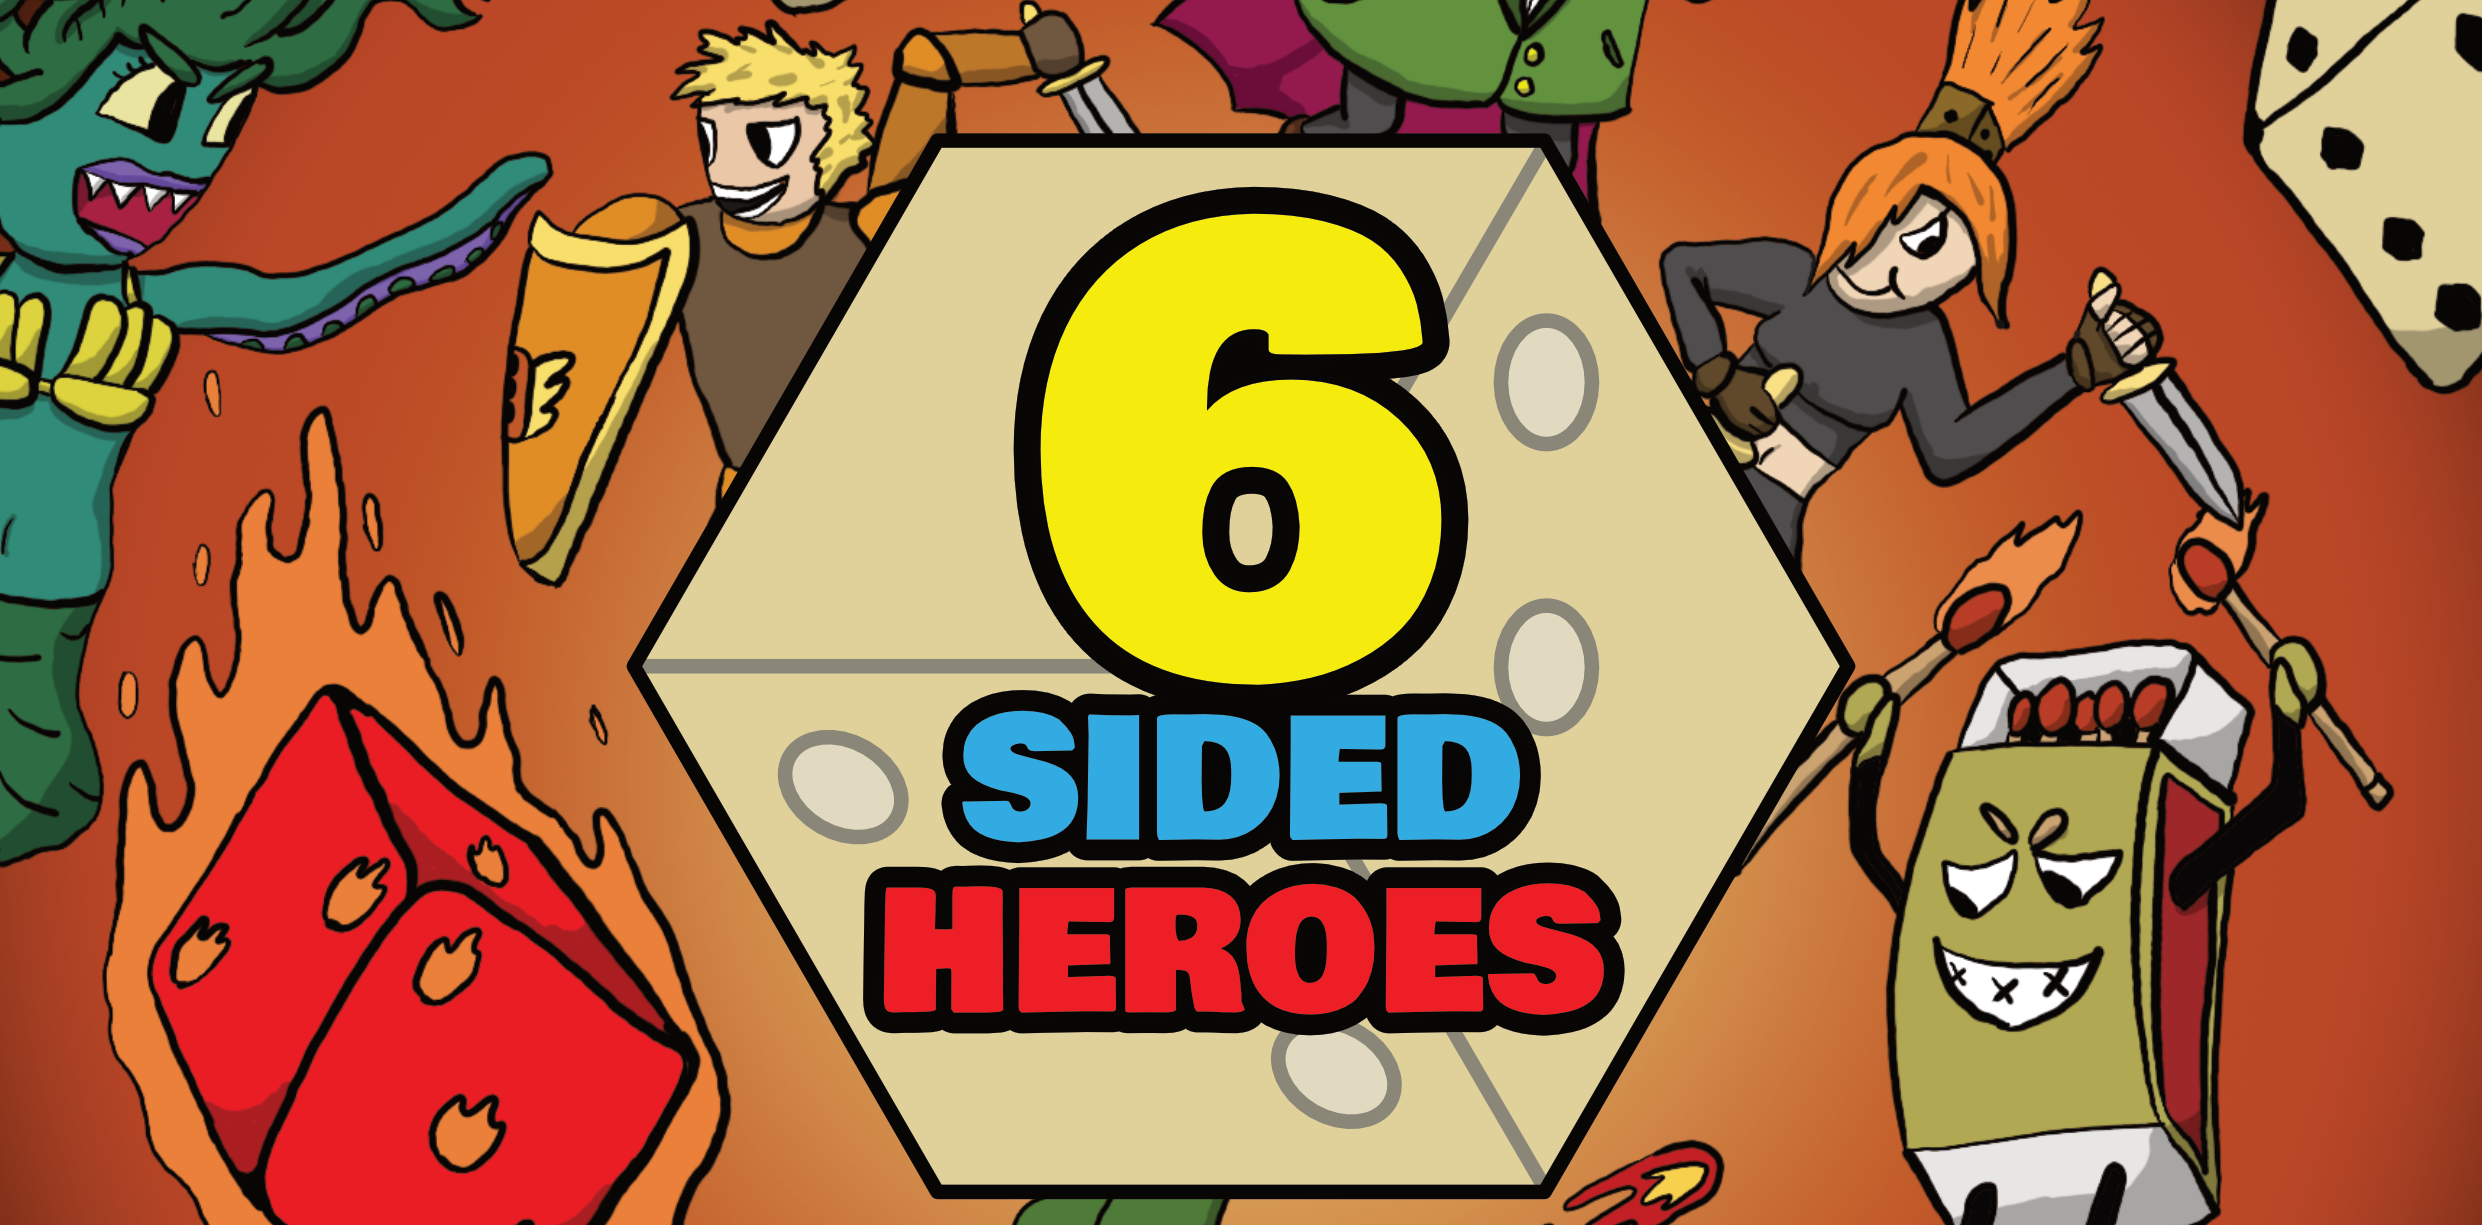 6 Sided Heroes